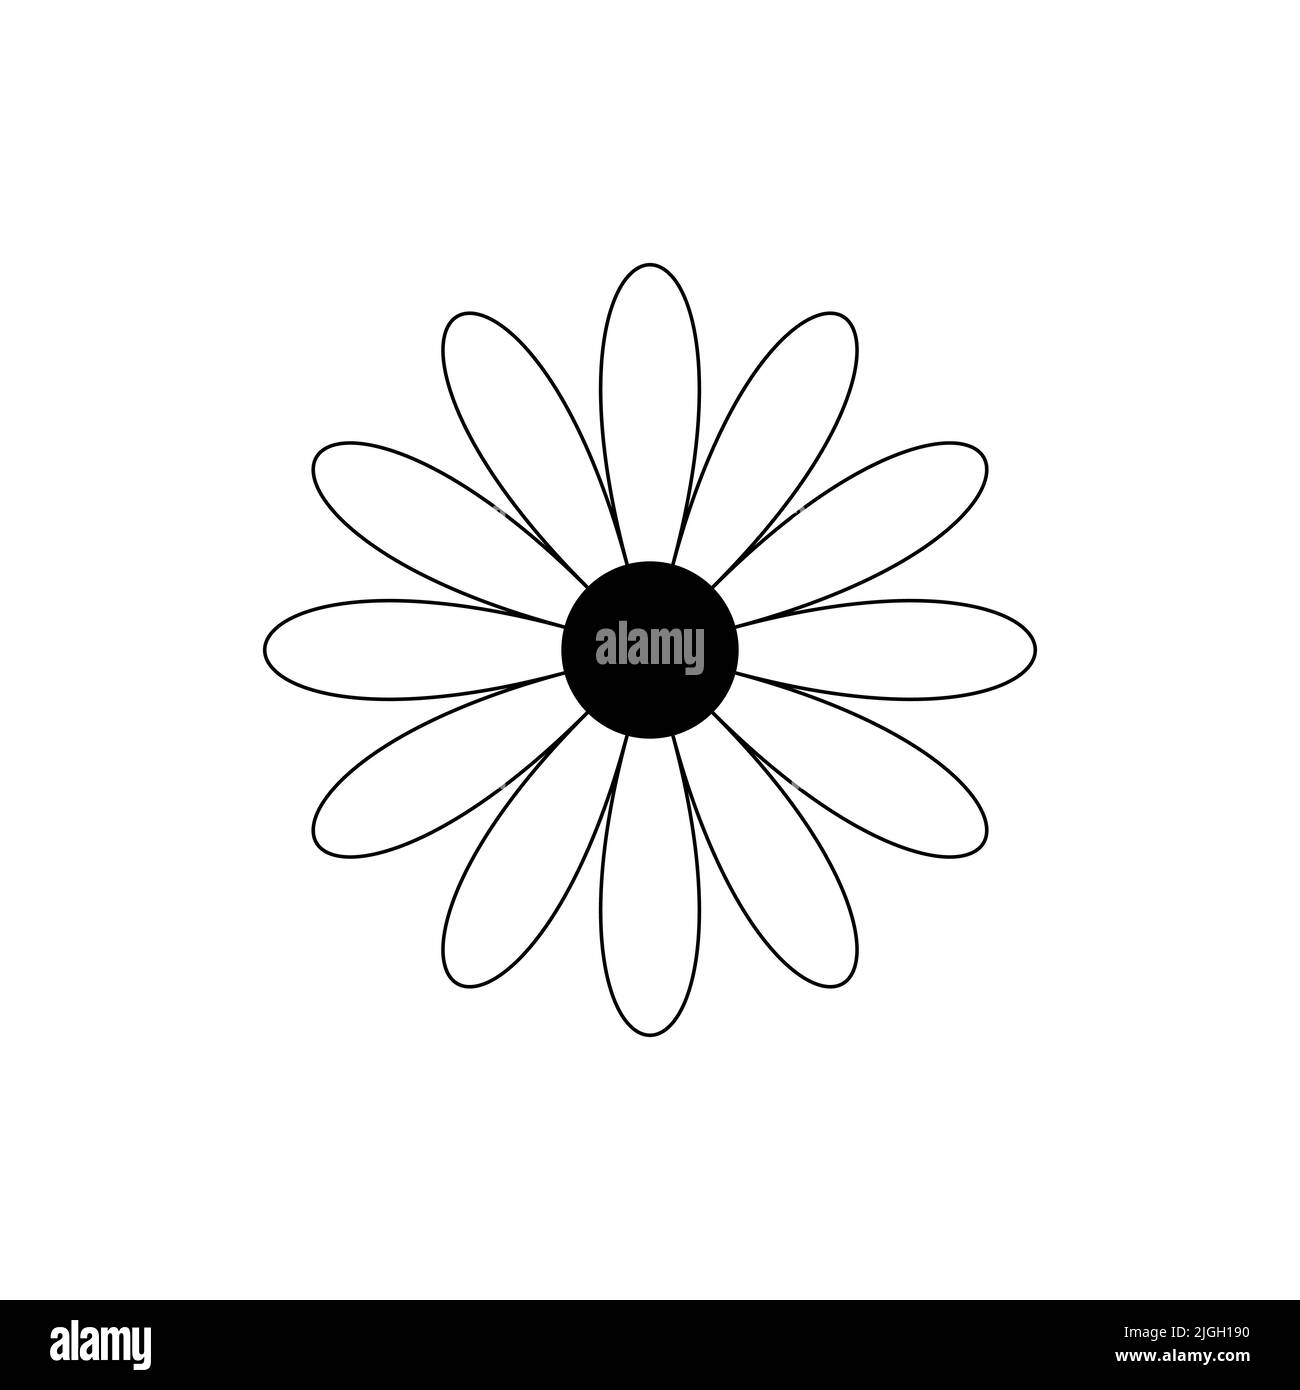 Daisy chamomile vector icon isolated on white background Stock Vector